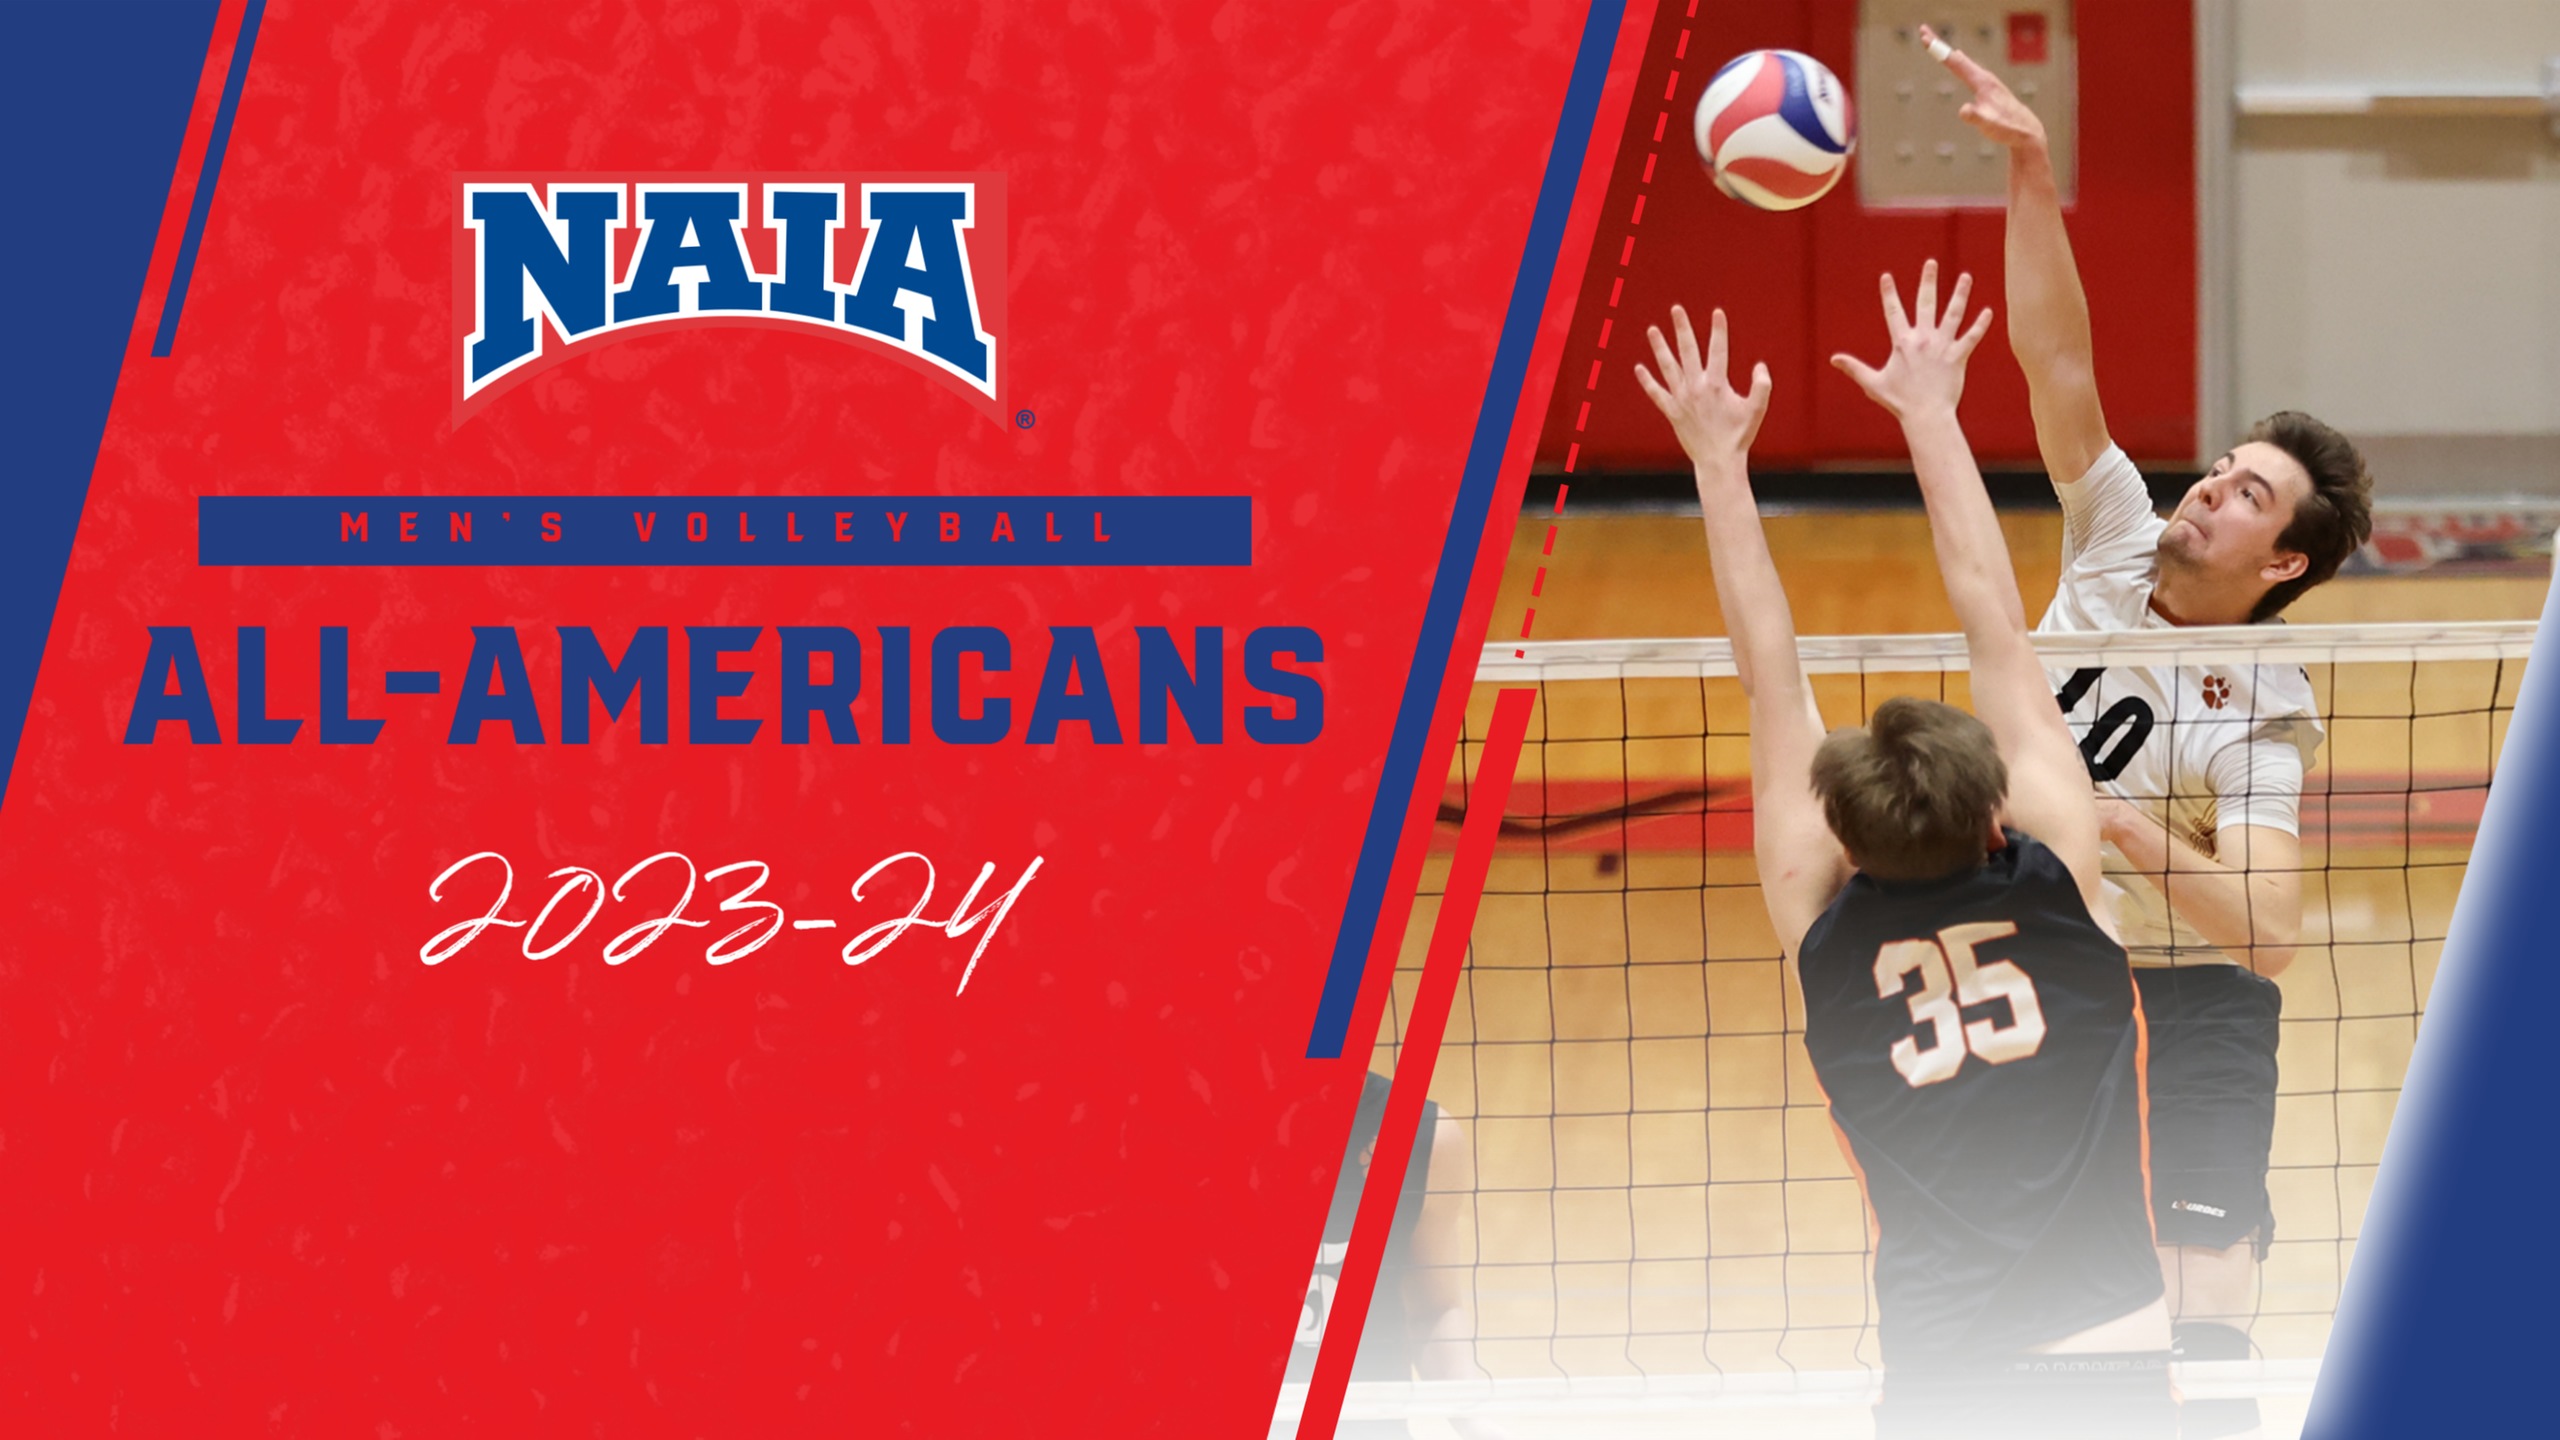 Lourdes' Ayala, CU's Broaster Named NAIA Men's Volleyball All-Americans